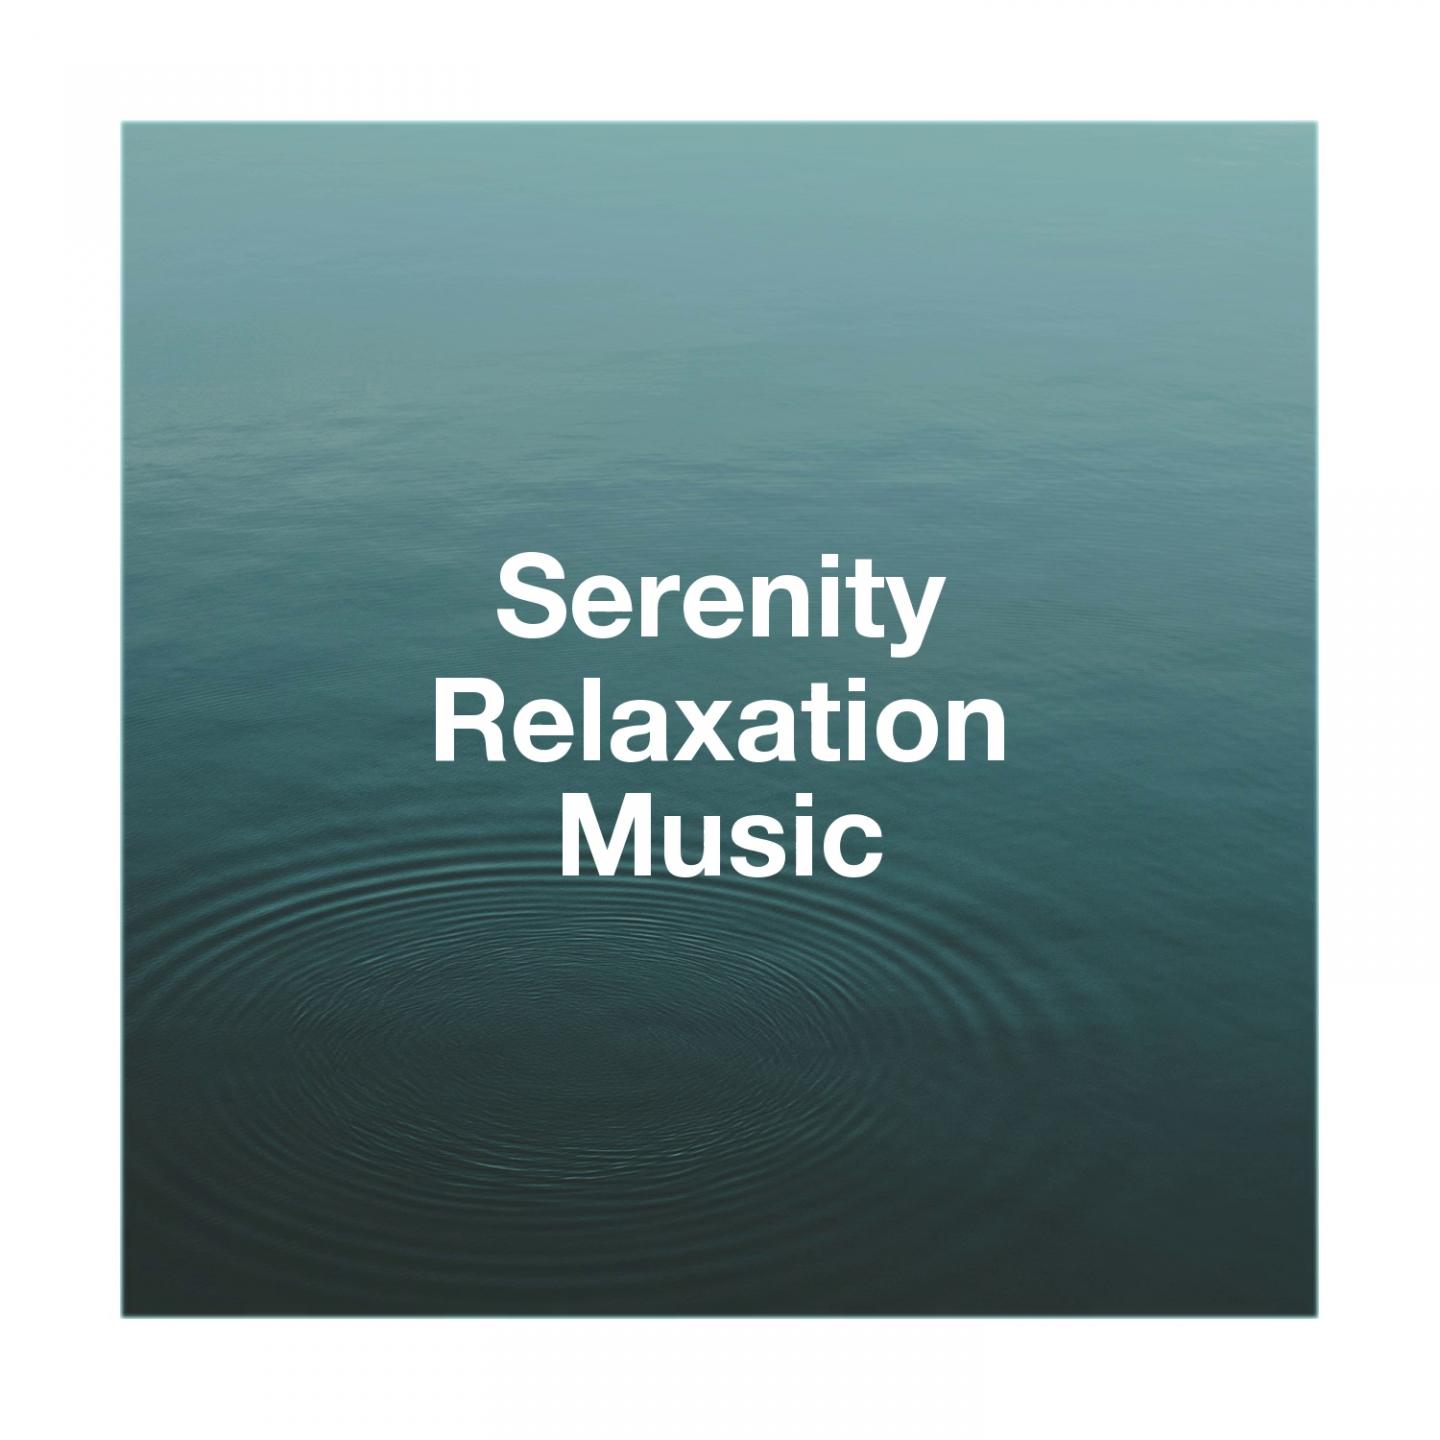 Serenity Relaxation Music